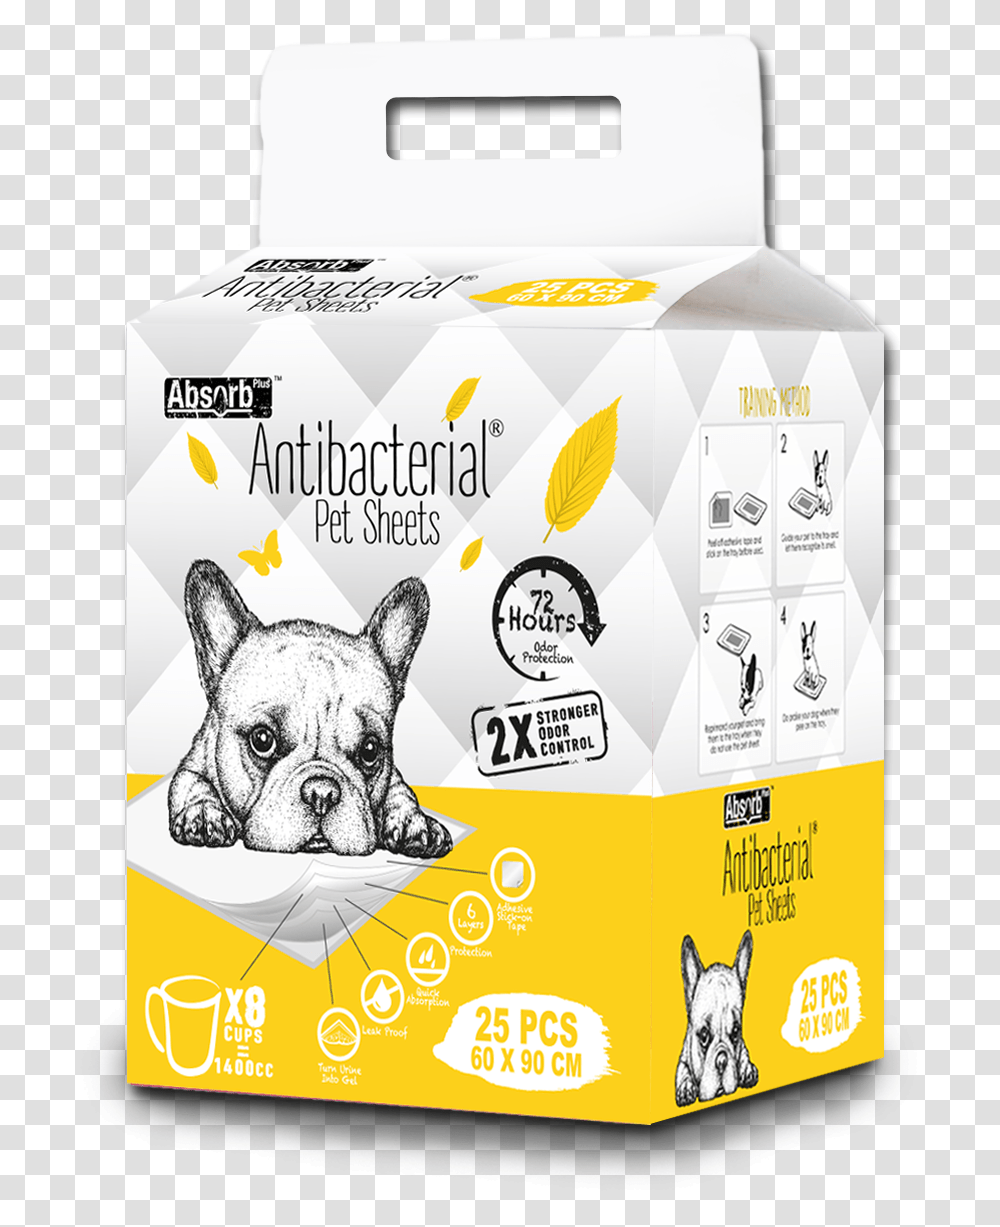 Absorb Plus Antibacterial Pet Sheets, Flyer, Poster, Dog, Canine Transparent Png